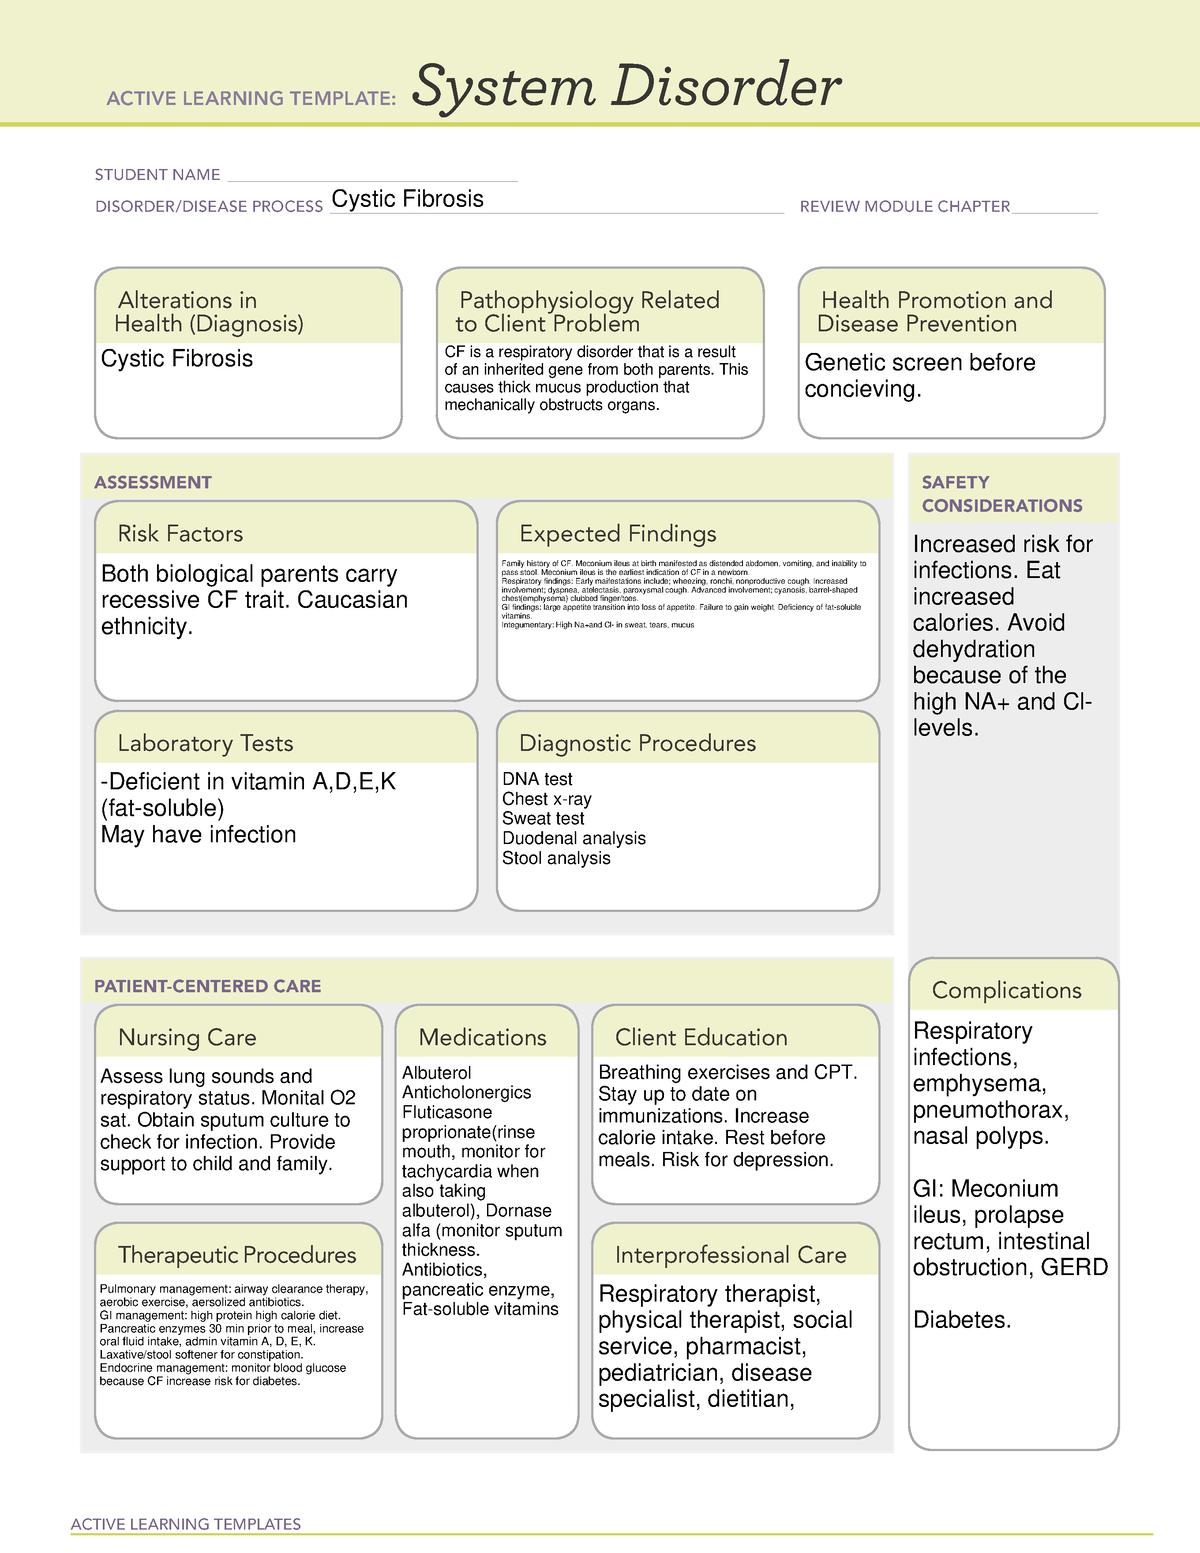 cystic-fibrosis-system-disorder-template